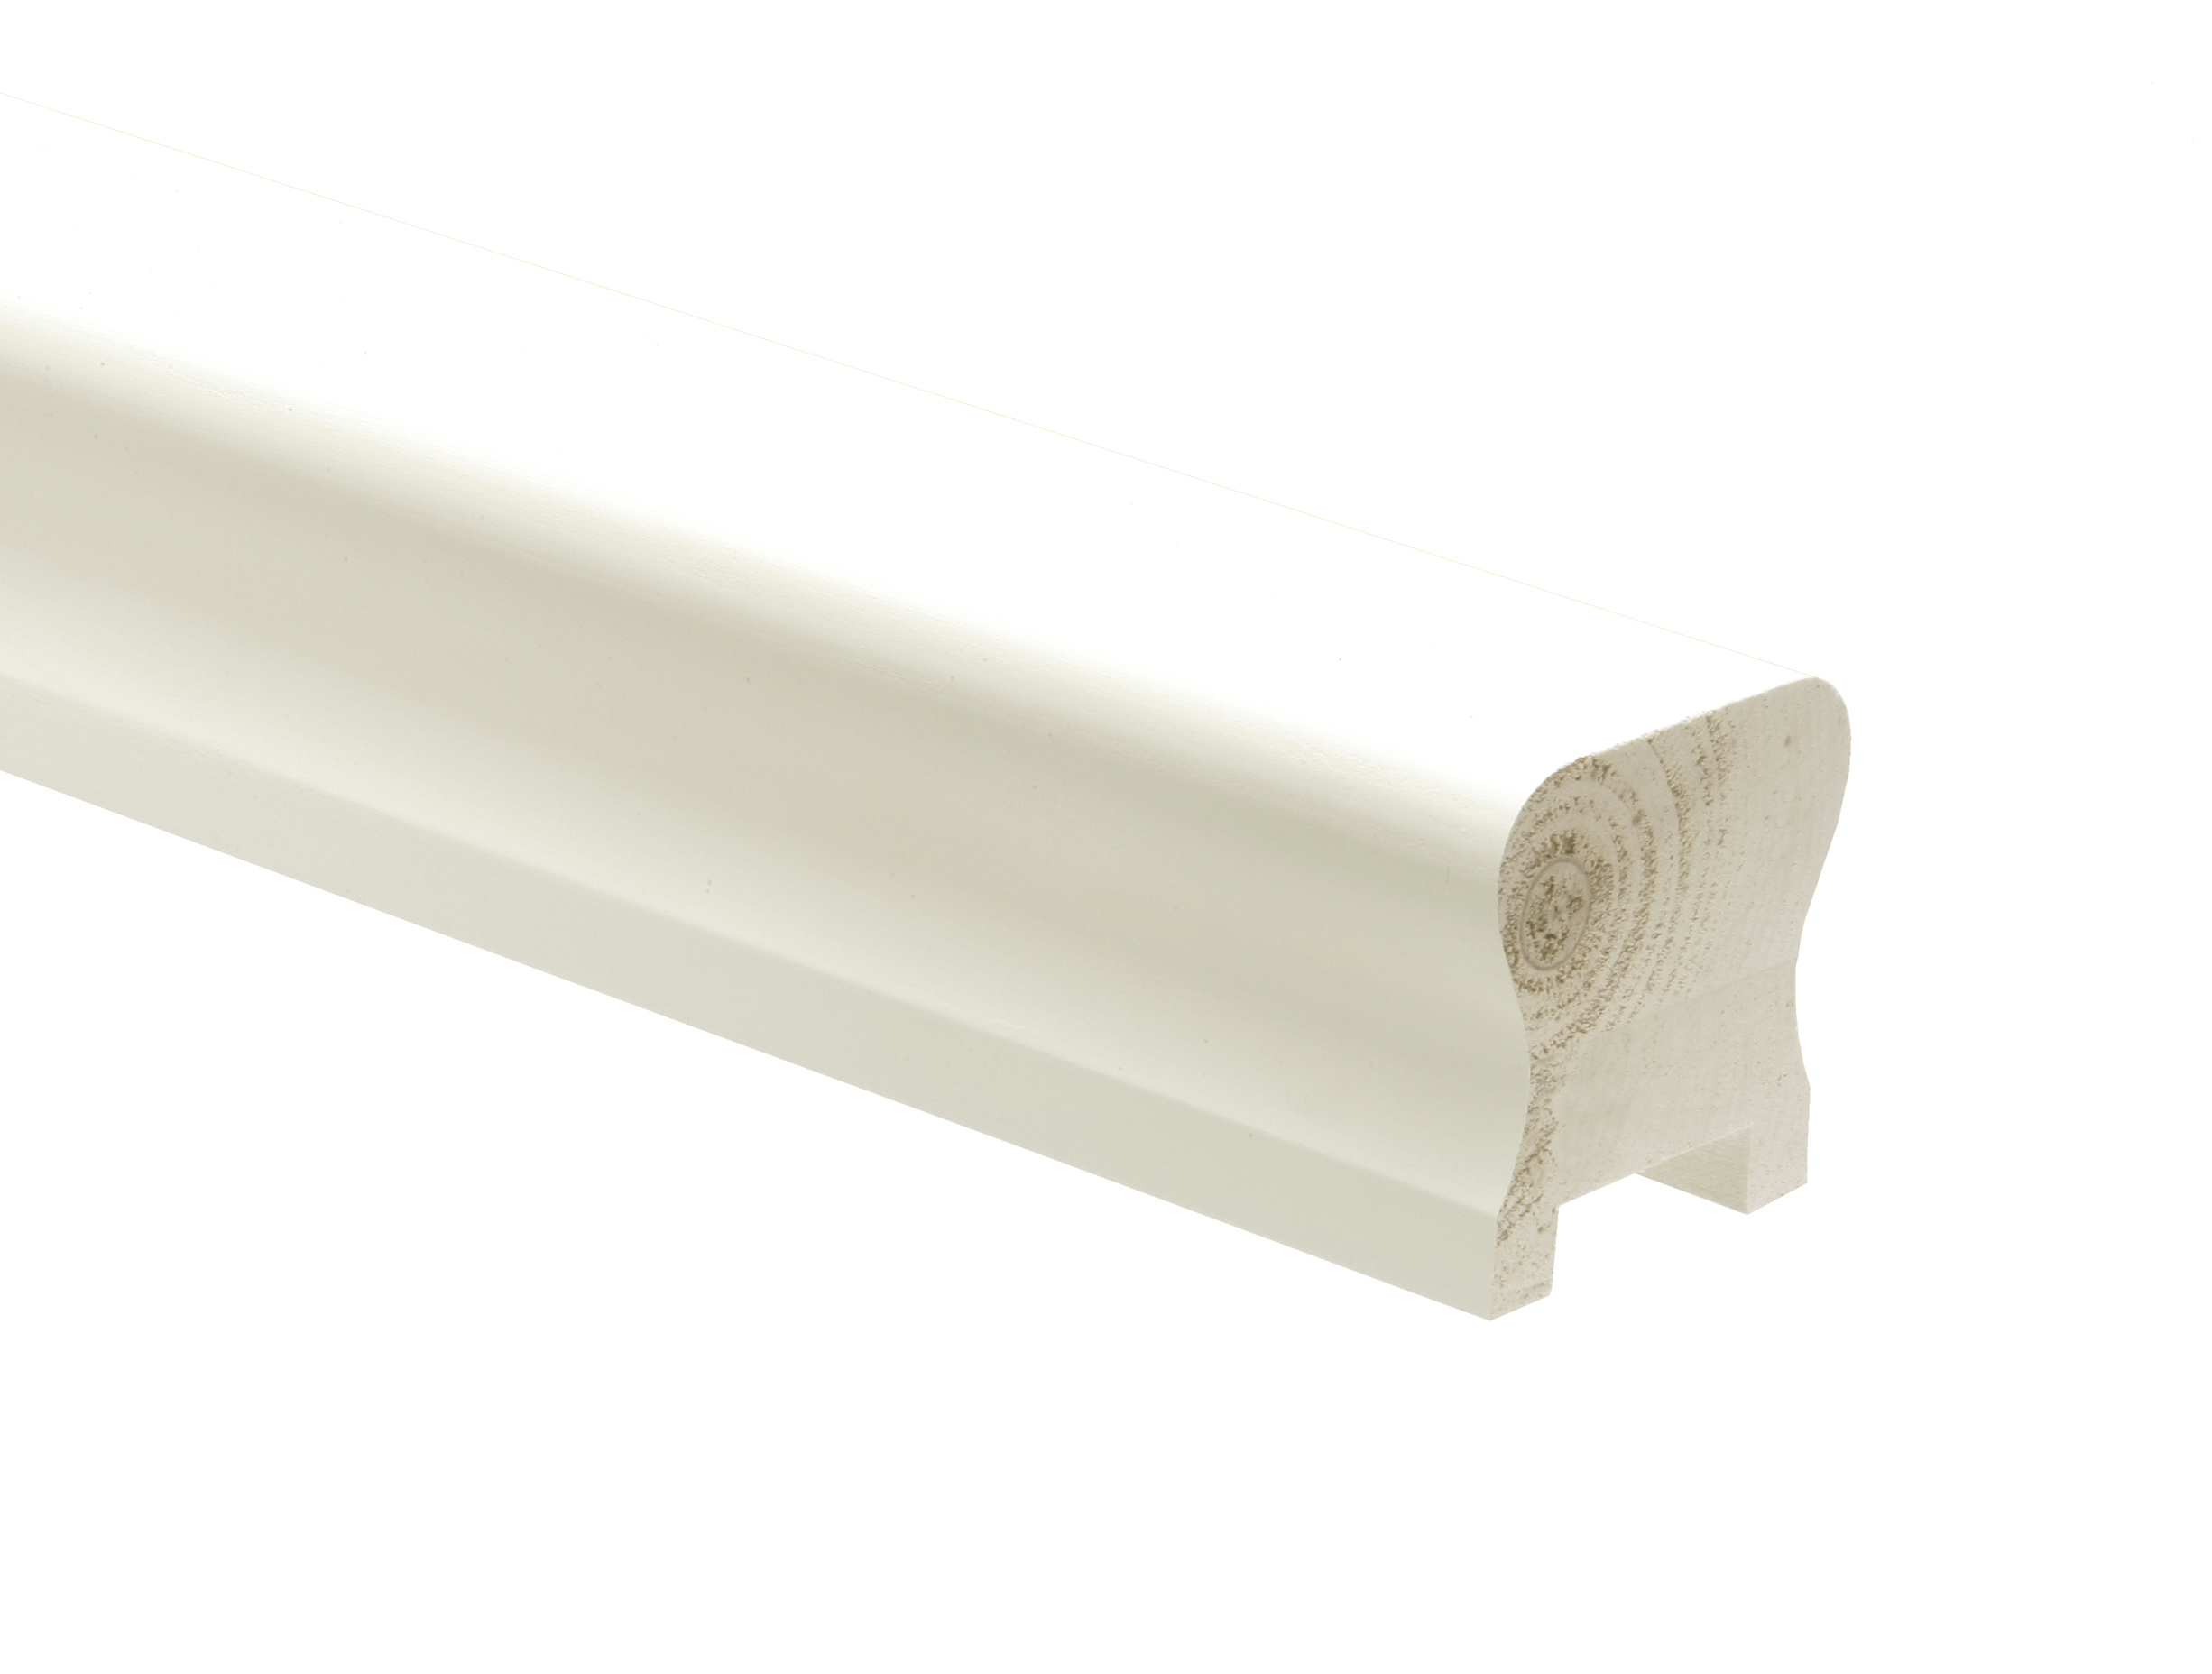 1 Smooth Primed HDR Handrail 2400 32